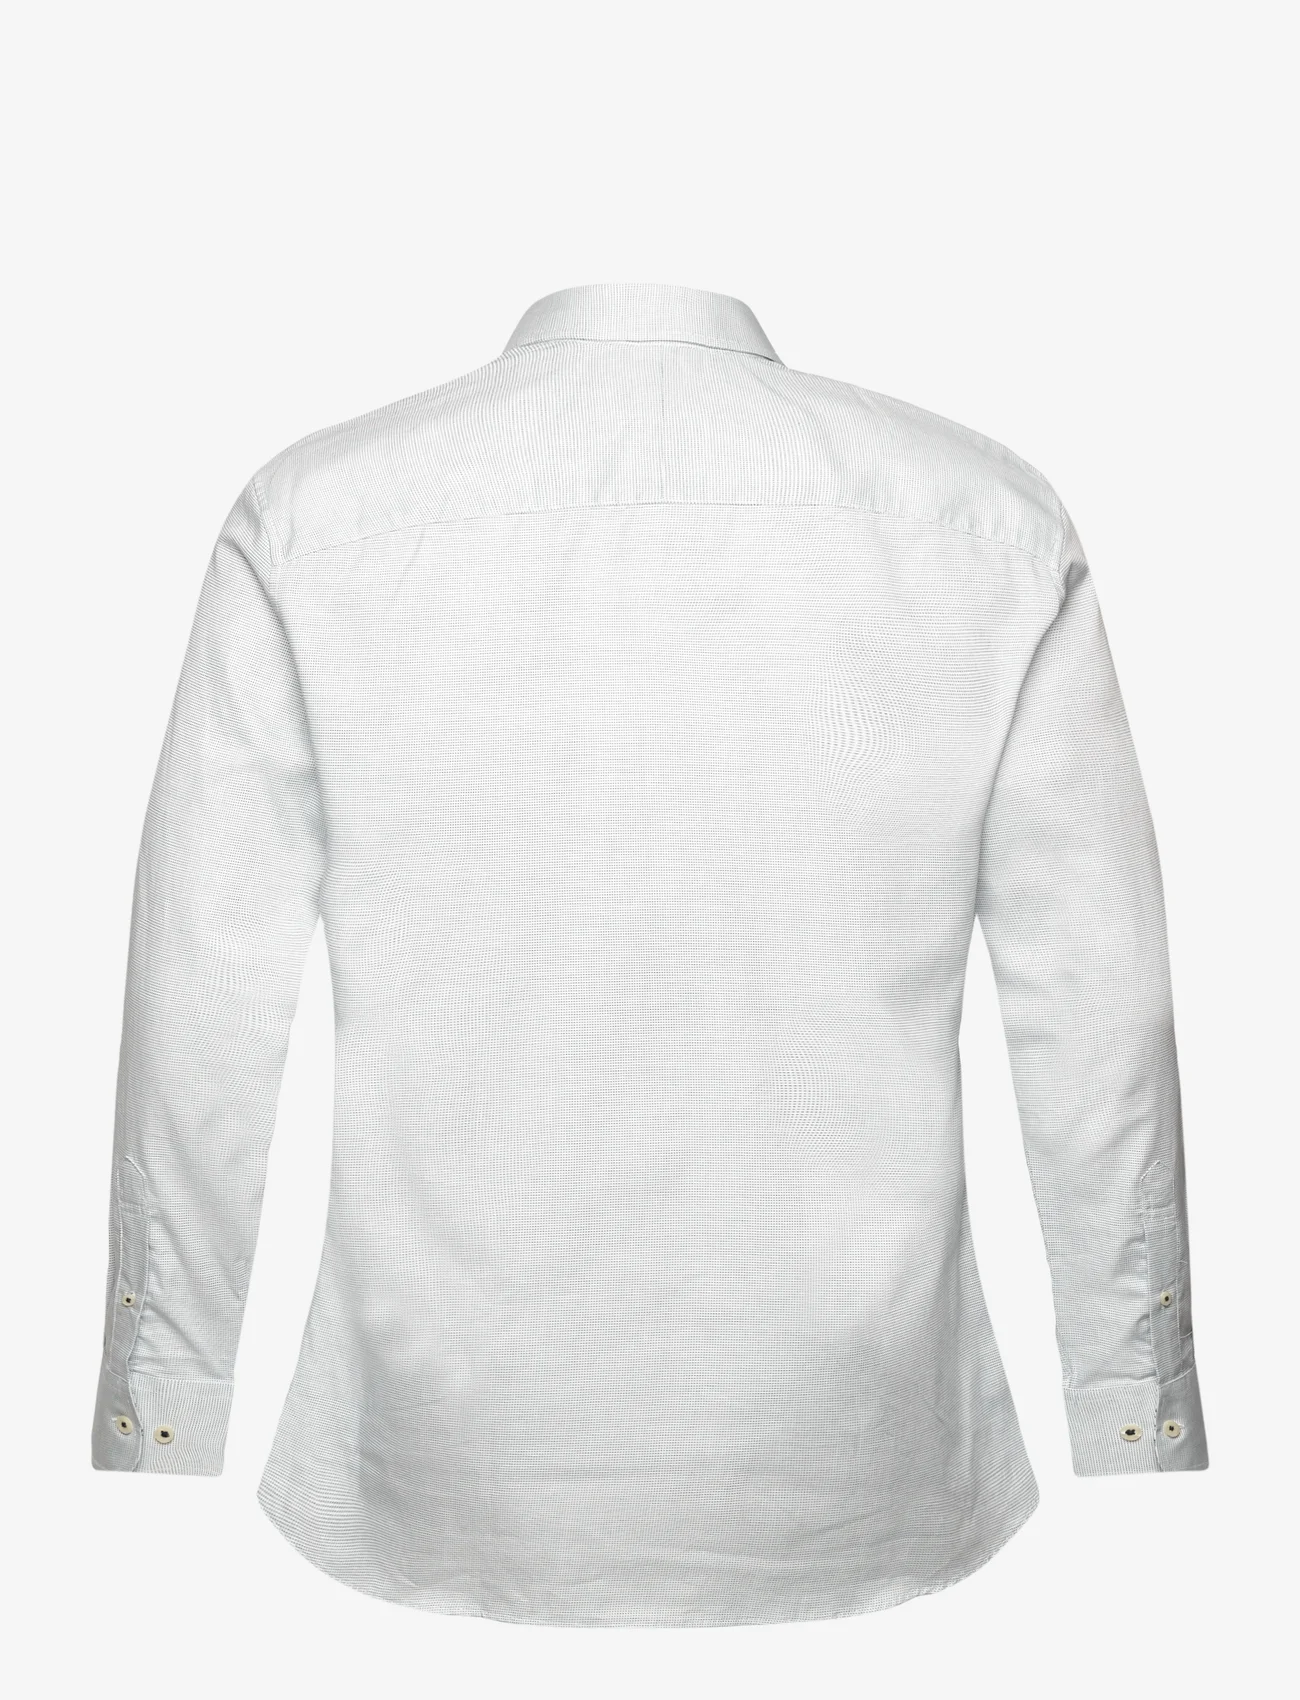 Selected Homme - SLHSLIMDETAIL SHIRT LS CLASSIC NOOS - laveste priser - bright white - 1